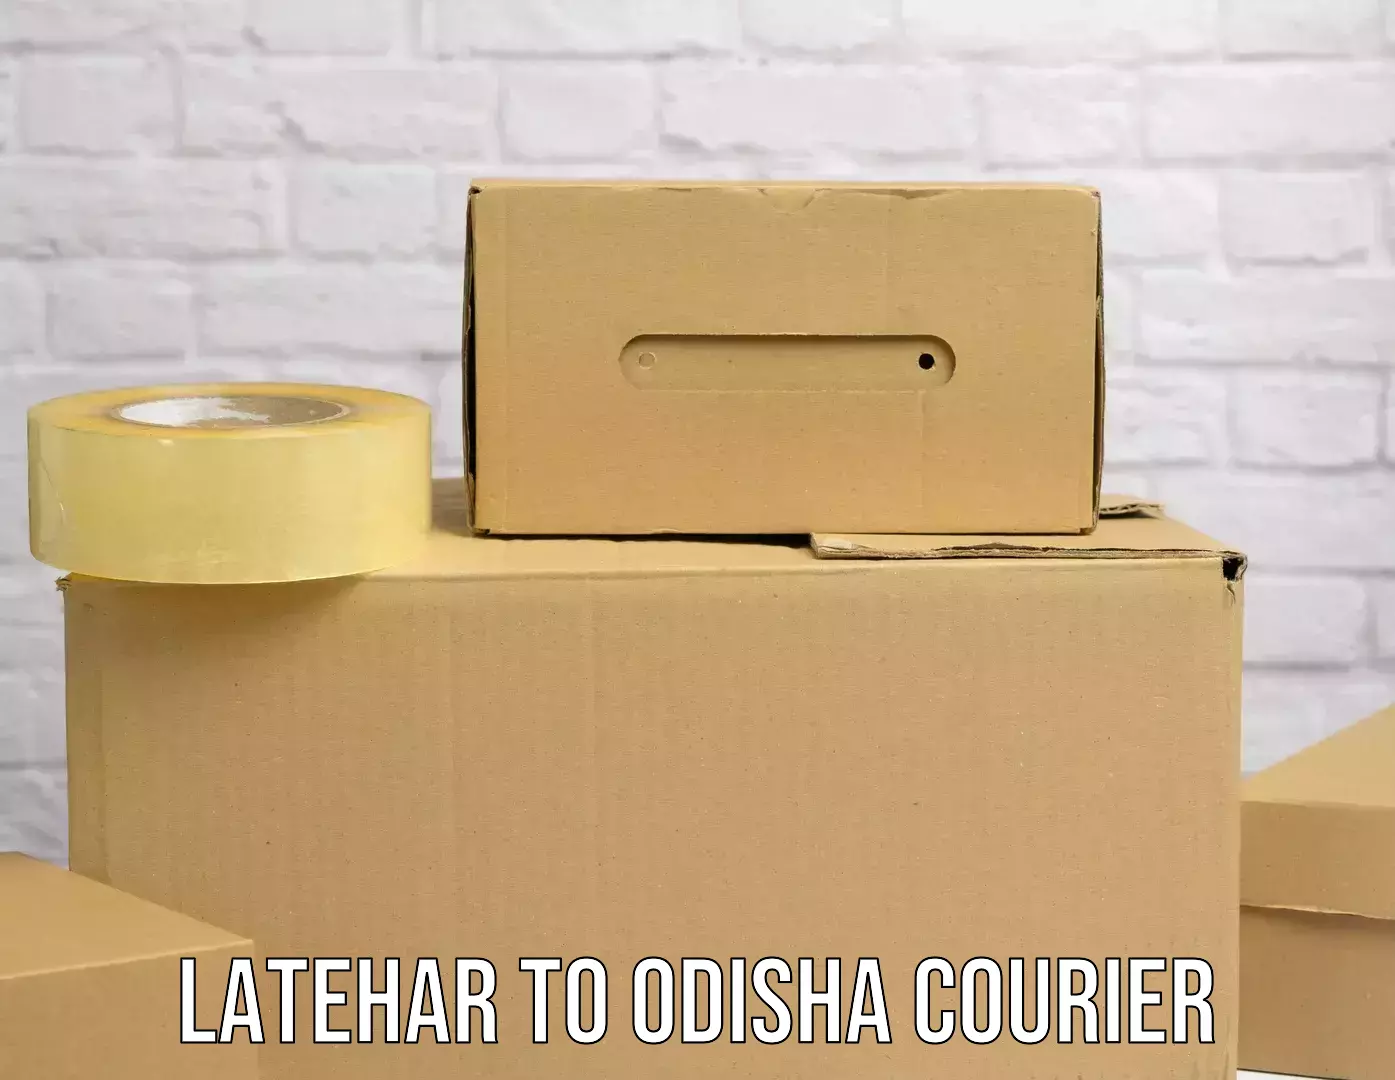 State-of-the-art courier technology Latehar to Odisha